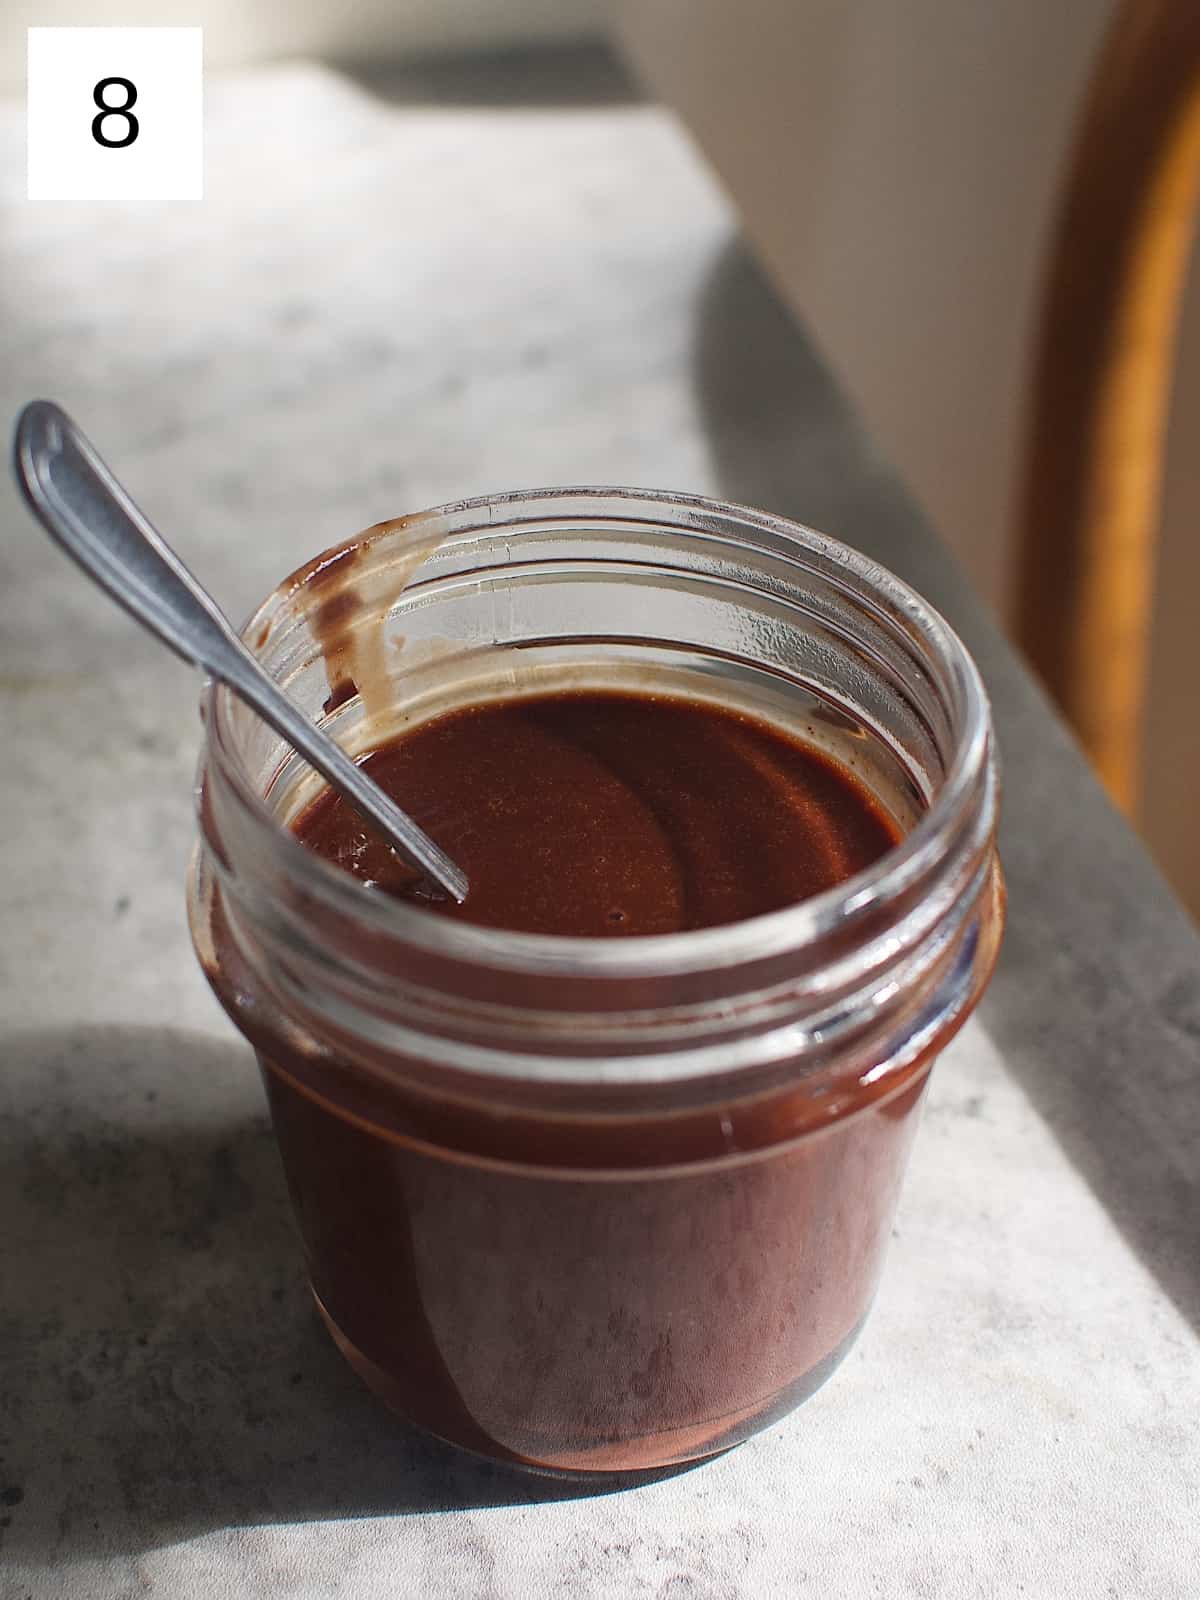 Cocoa syrup in a glass jar with a table spoon.